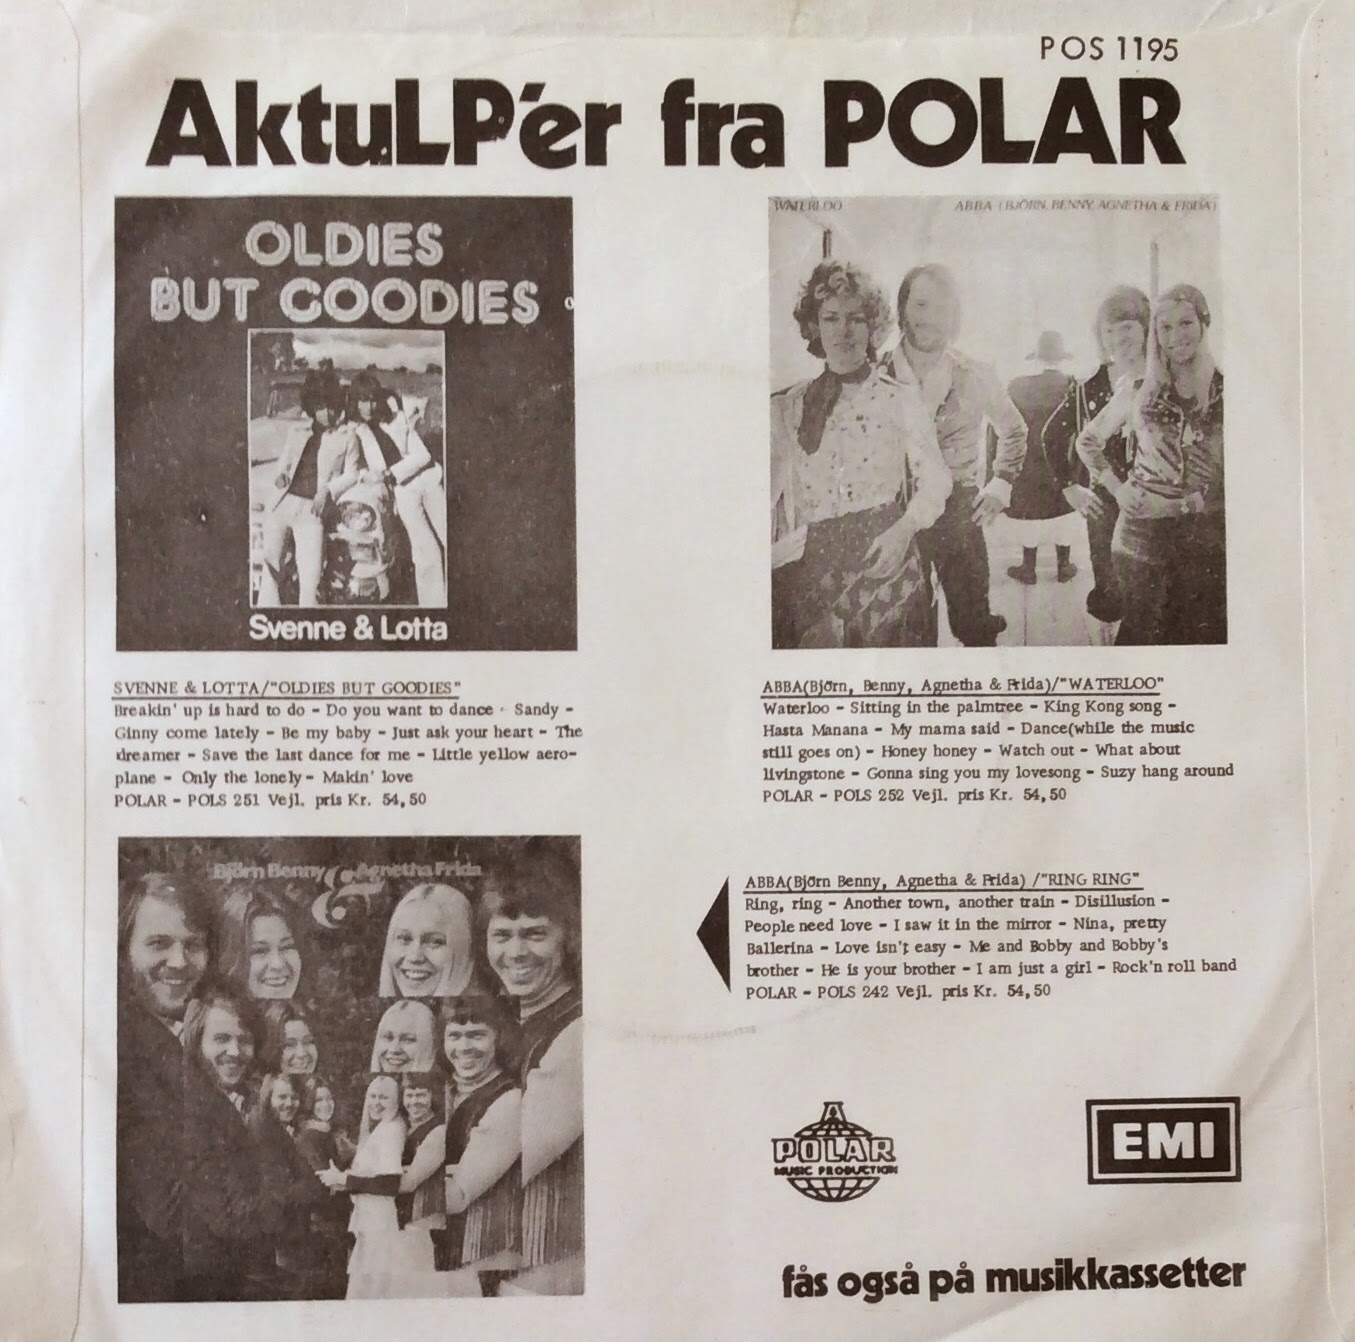 ABBA Fans Blog: Collection Update - "So Long" Single